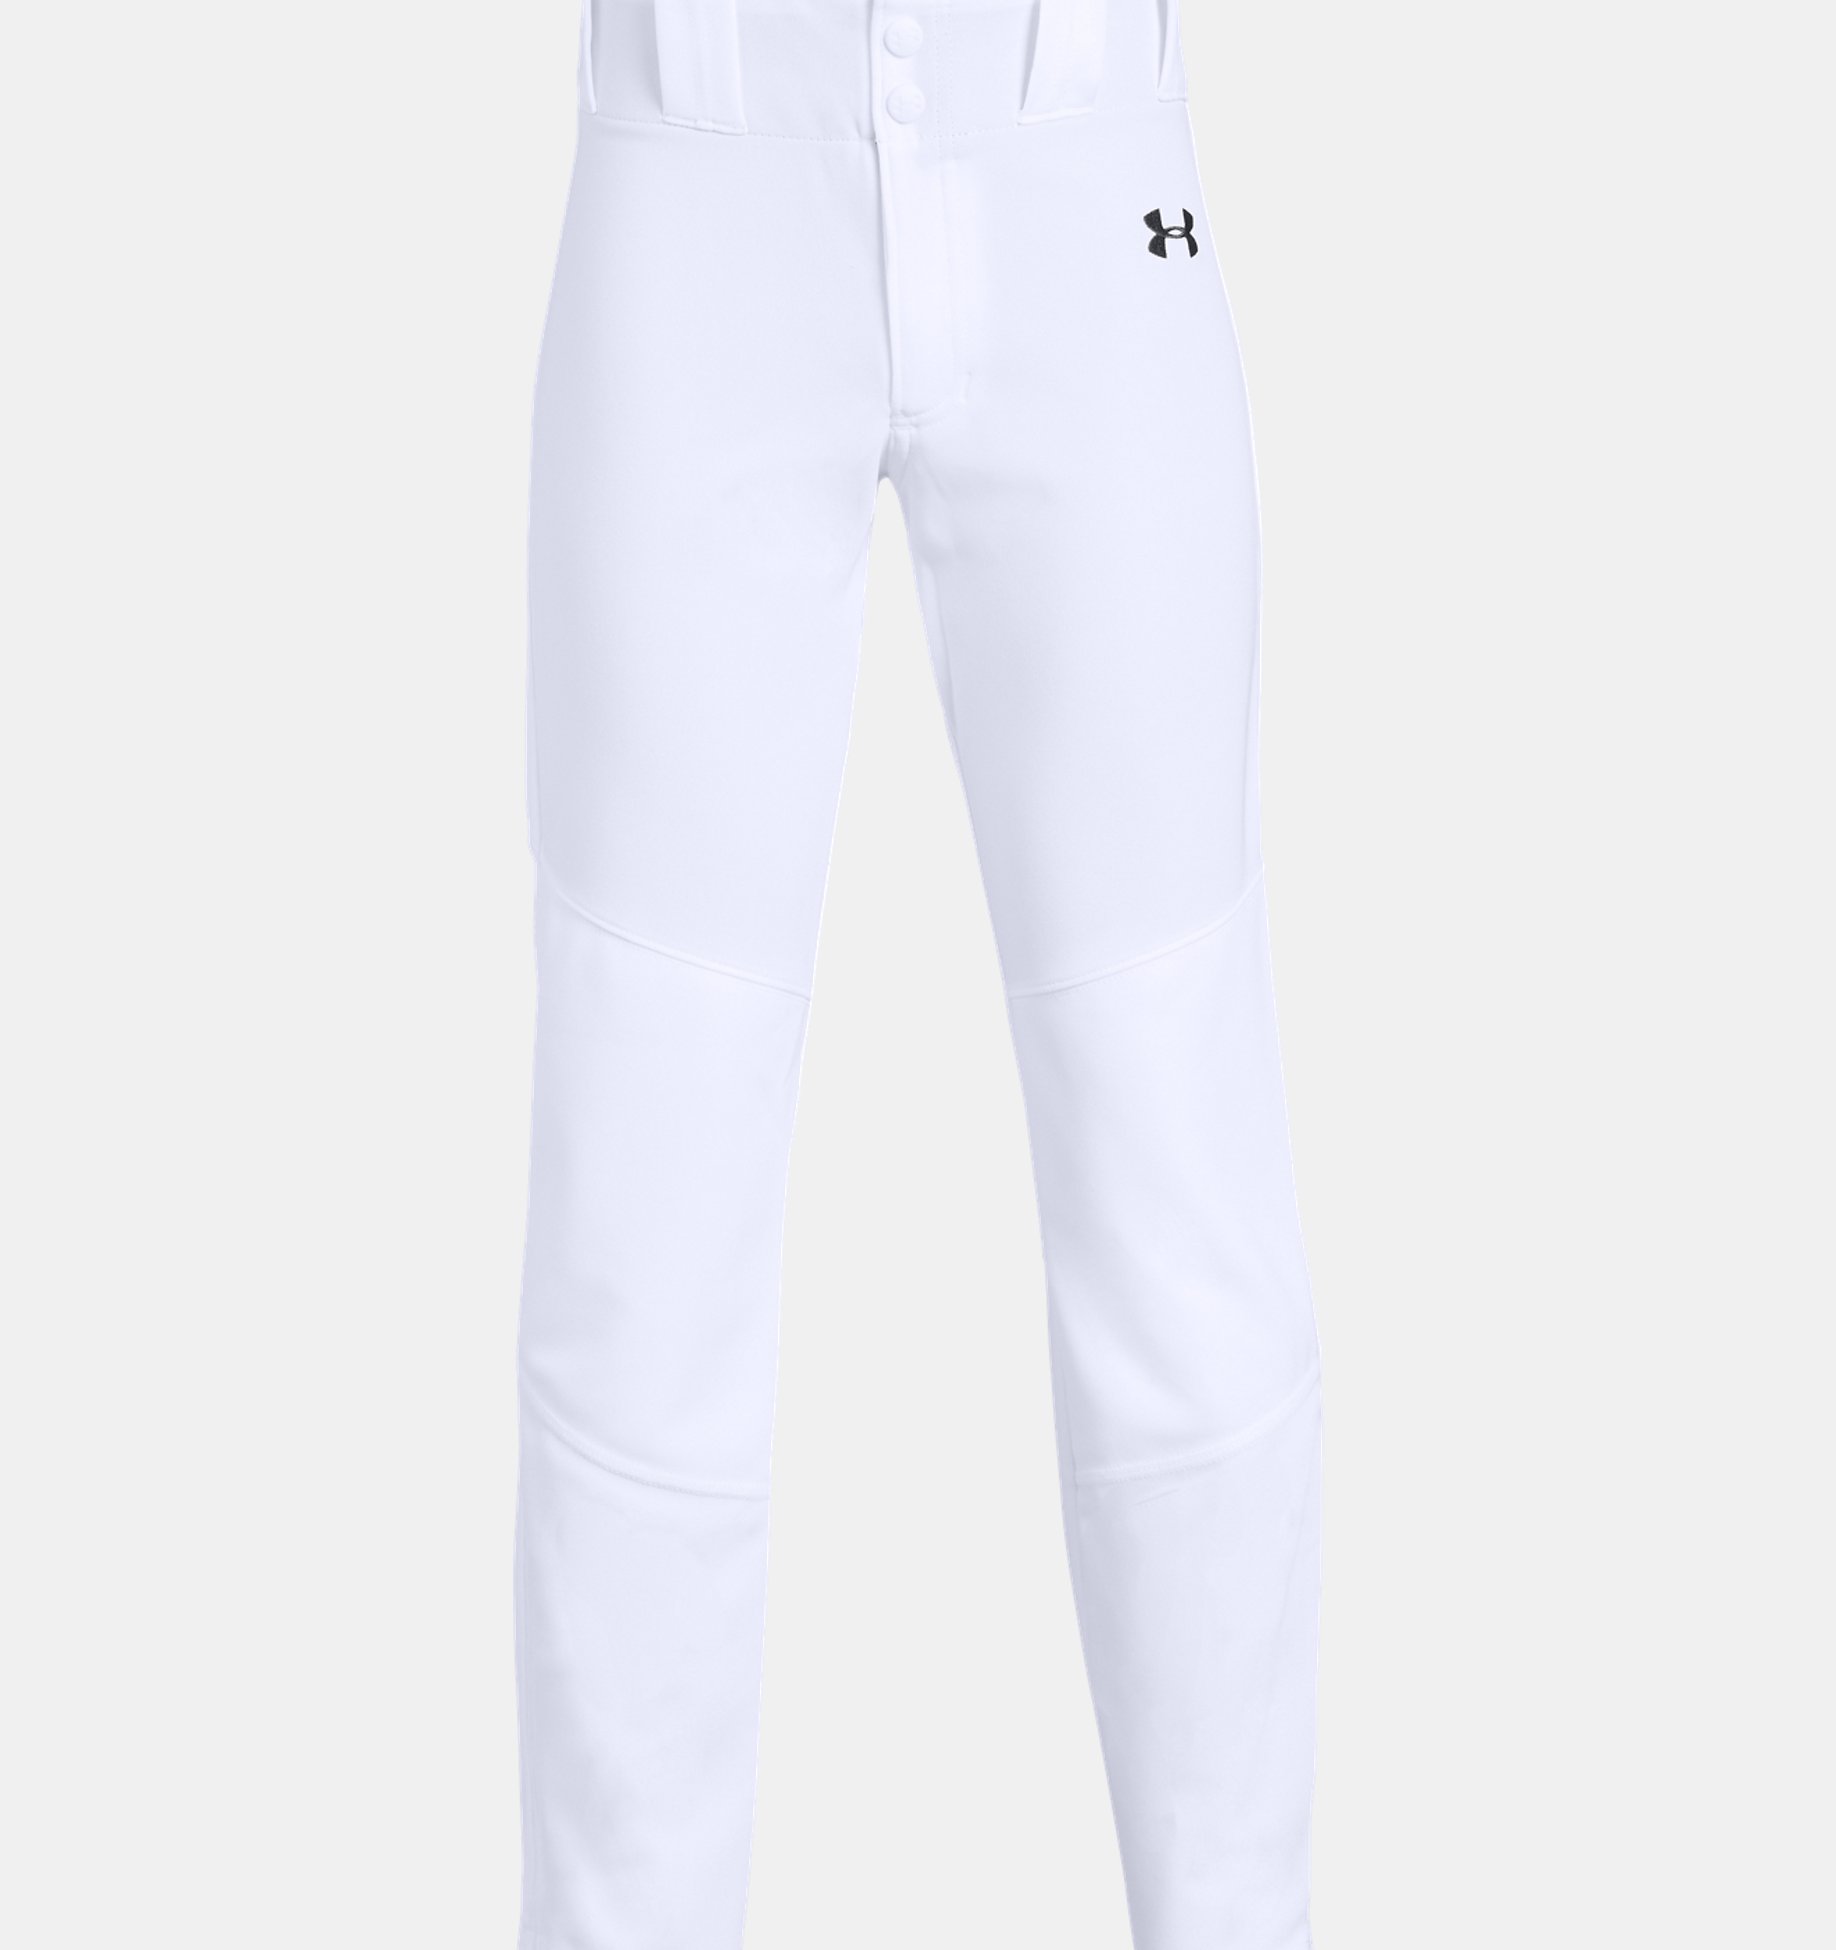 XL Details about   Under Armour Boys Ace Releaxed Baseball Softball Pants Save 45%! 